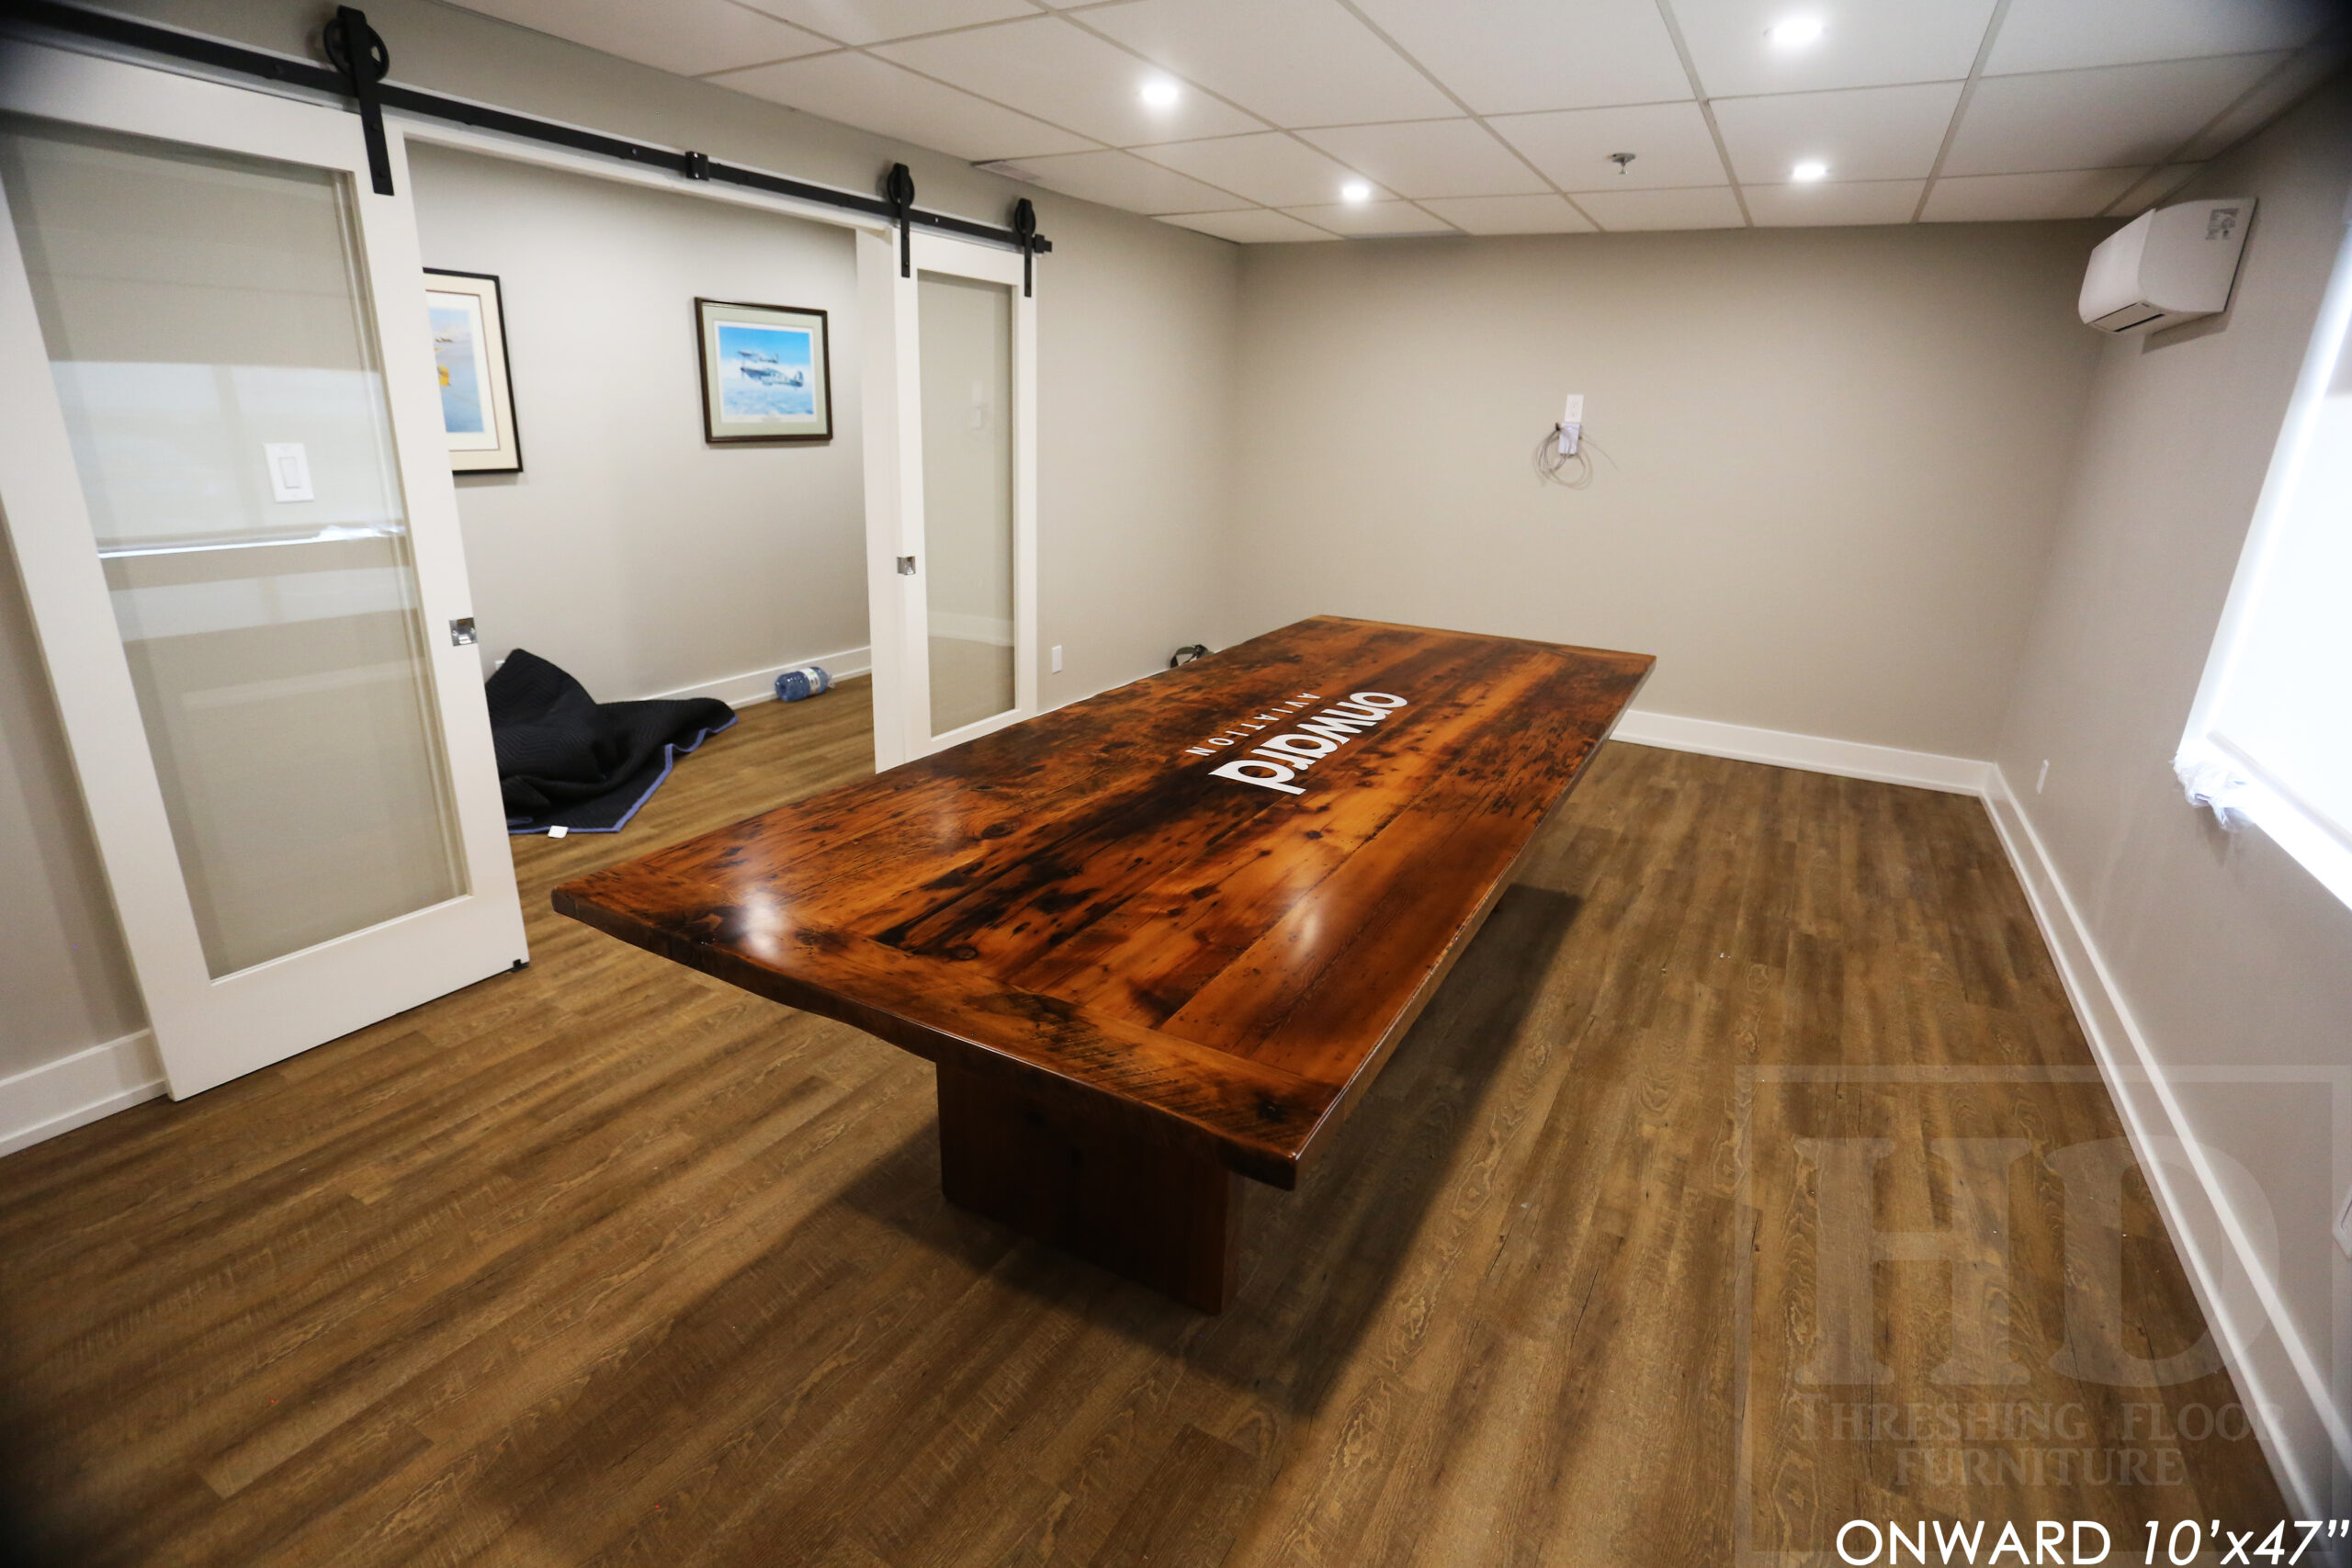 10 ft Reclaimed Wood Boardroom Table - 47" wide - Reclaimed Hemlock Threshing Floor Construction - Original edges & distressing maintained - Modern Plank style base - Custom metal logo routered into top - Premium epoxy + satin polyurethane finish / www.table.ca